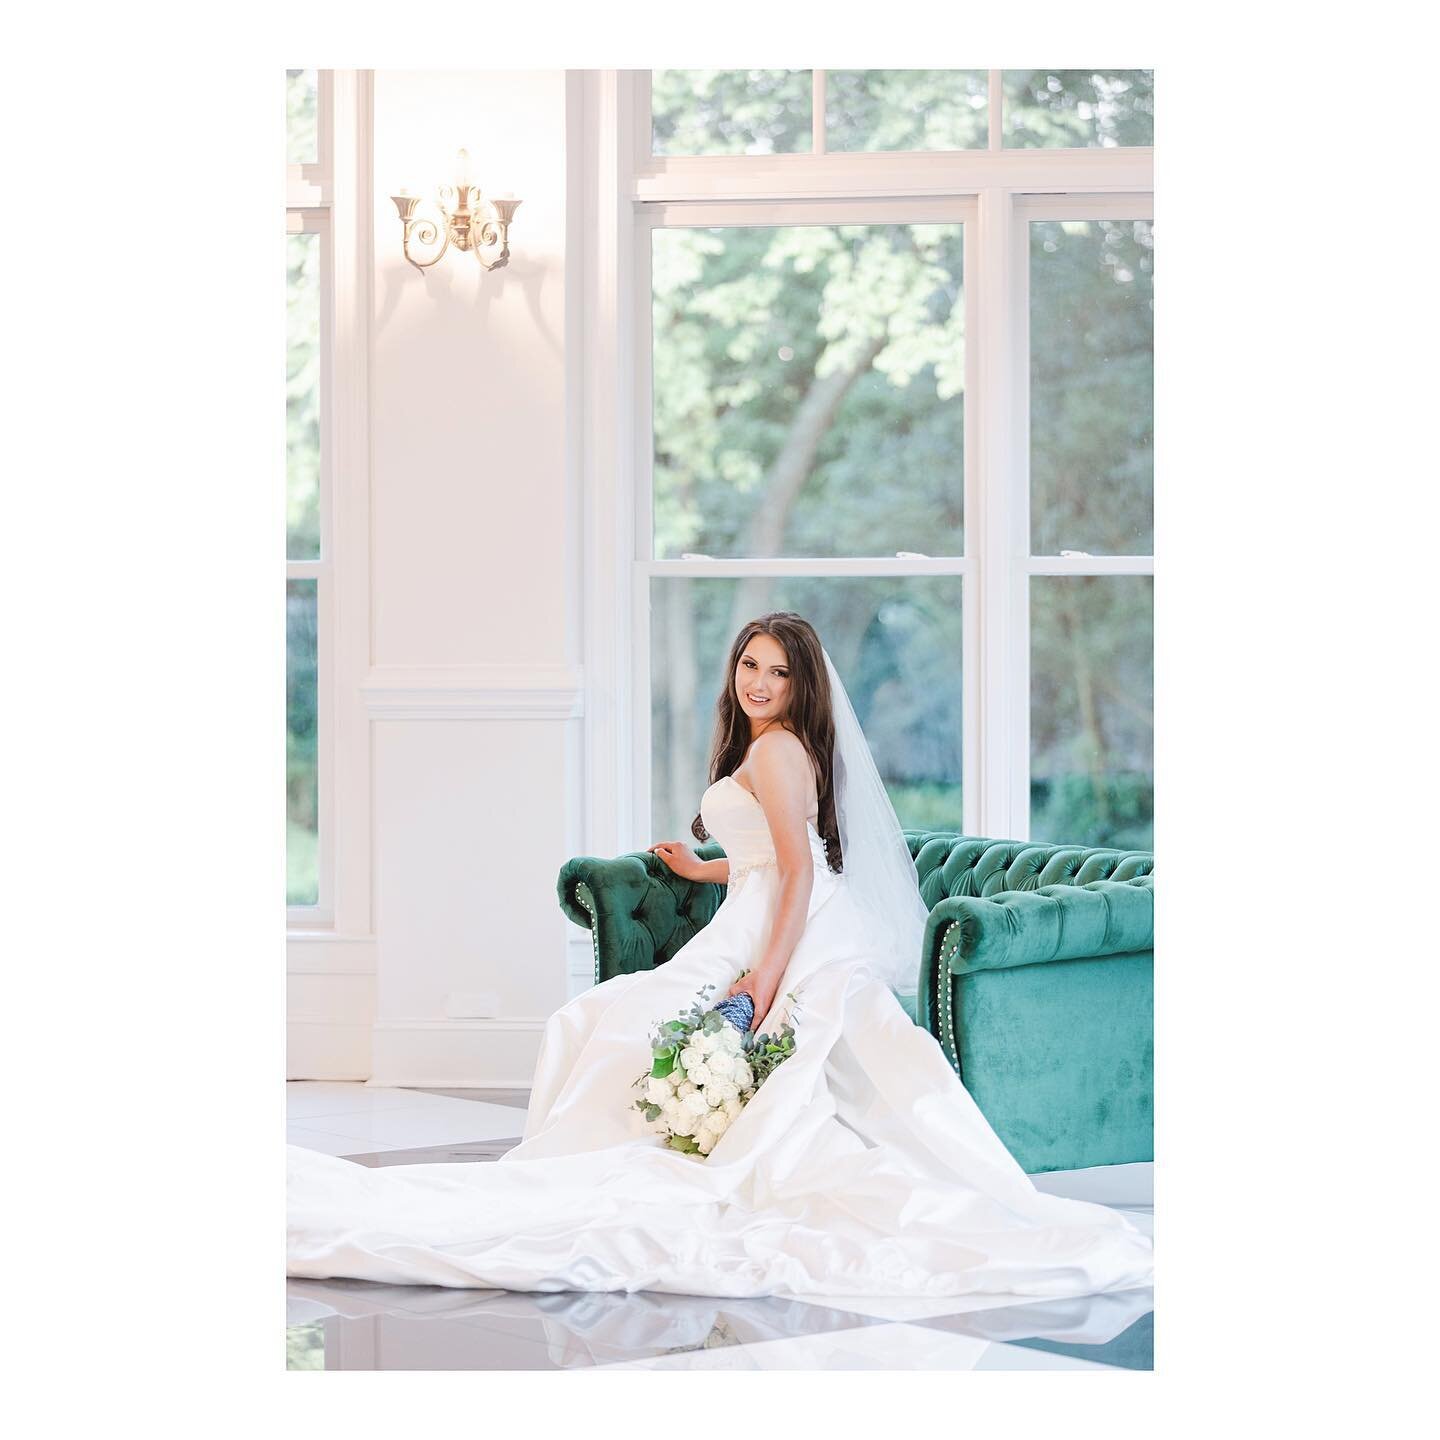 The interior of The Grande Victorian is just as beautiful as the exterior, but Alannah in her bridal gown is the real showstopper!
.
.
@alannahgrennlee22 
@thegrandevictorian 
@lakensmithmua 
.
.
.
.
#thegrandevictorian #monroenc #bridalgown #bridalp